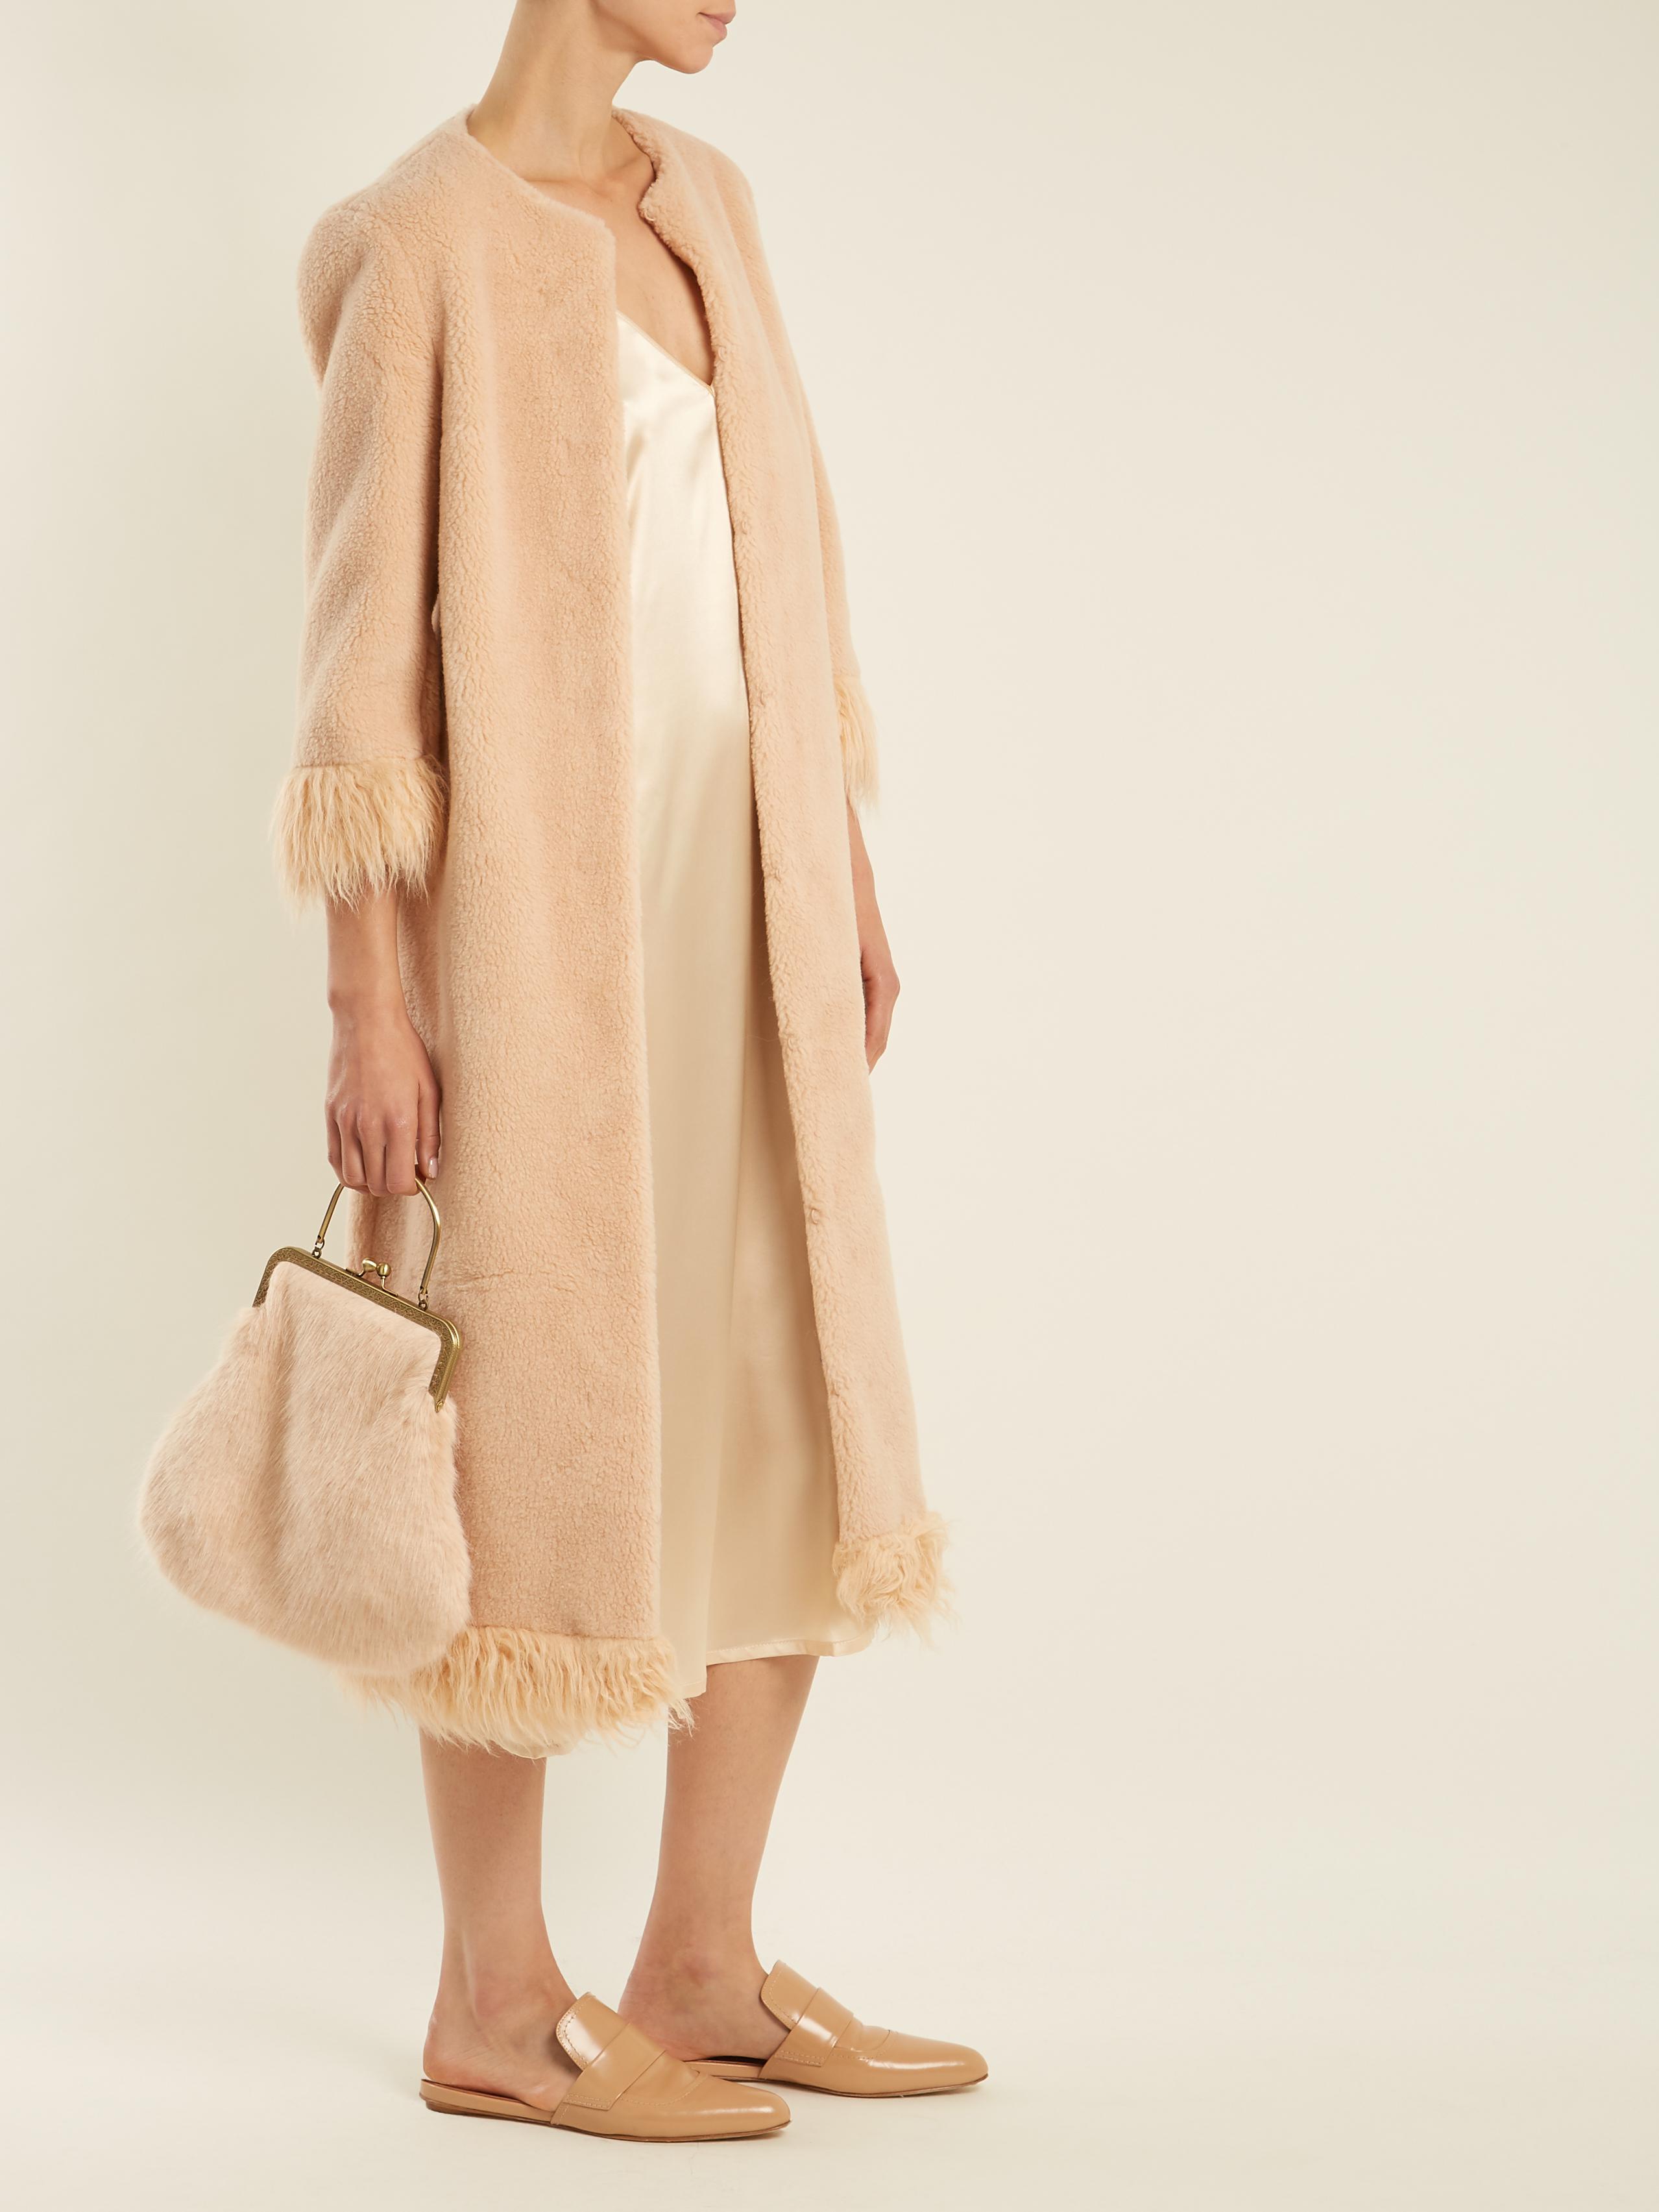 Lyst - Shrimps Ramsey Collarless Faux-shearling Coat in Pink